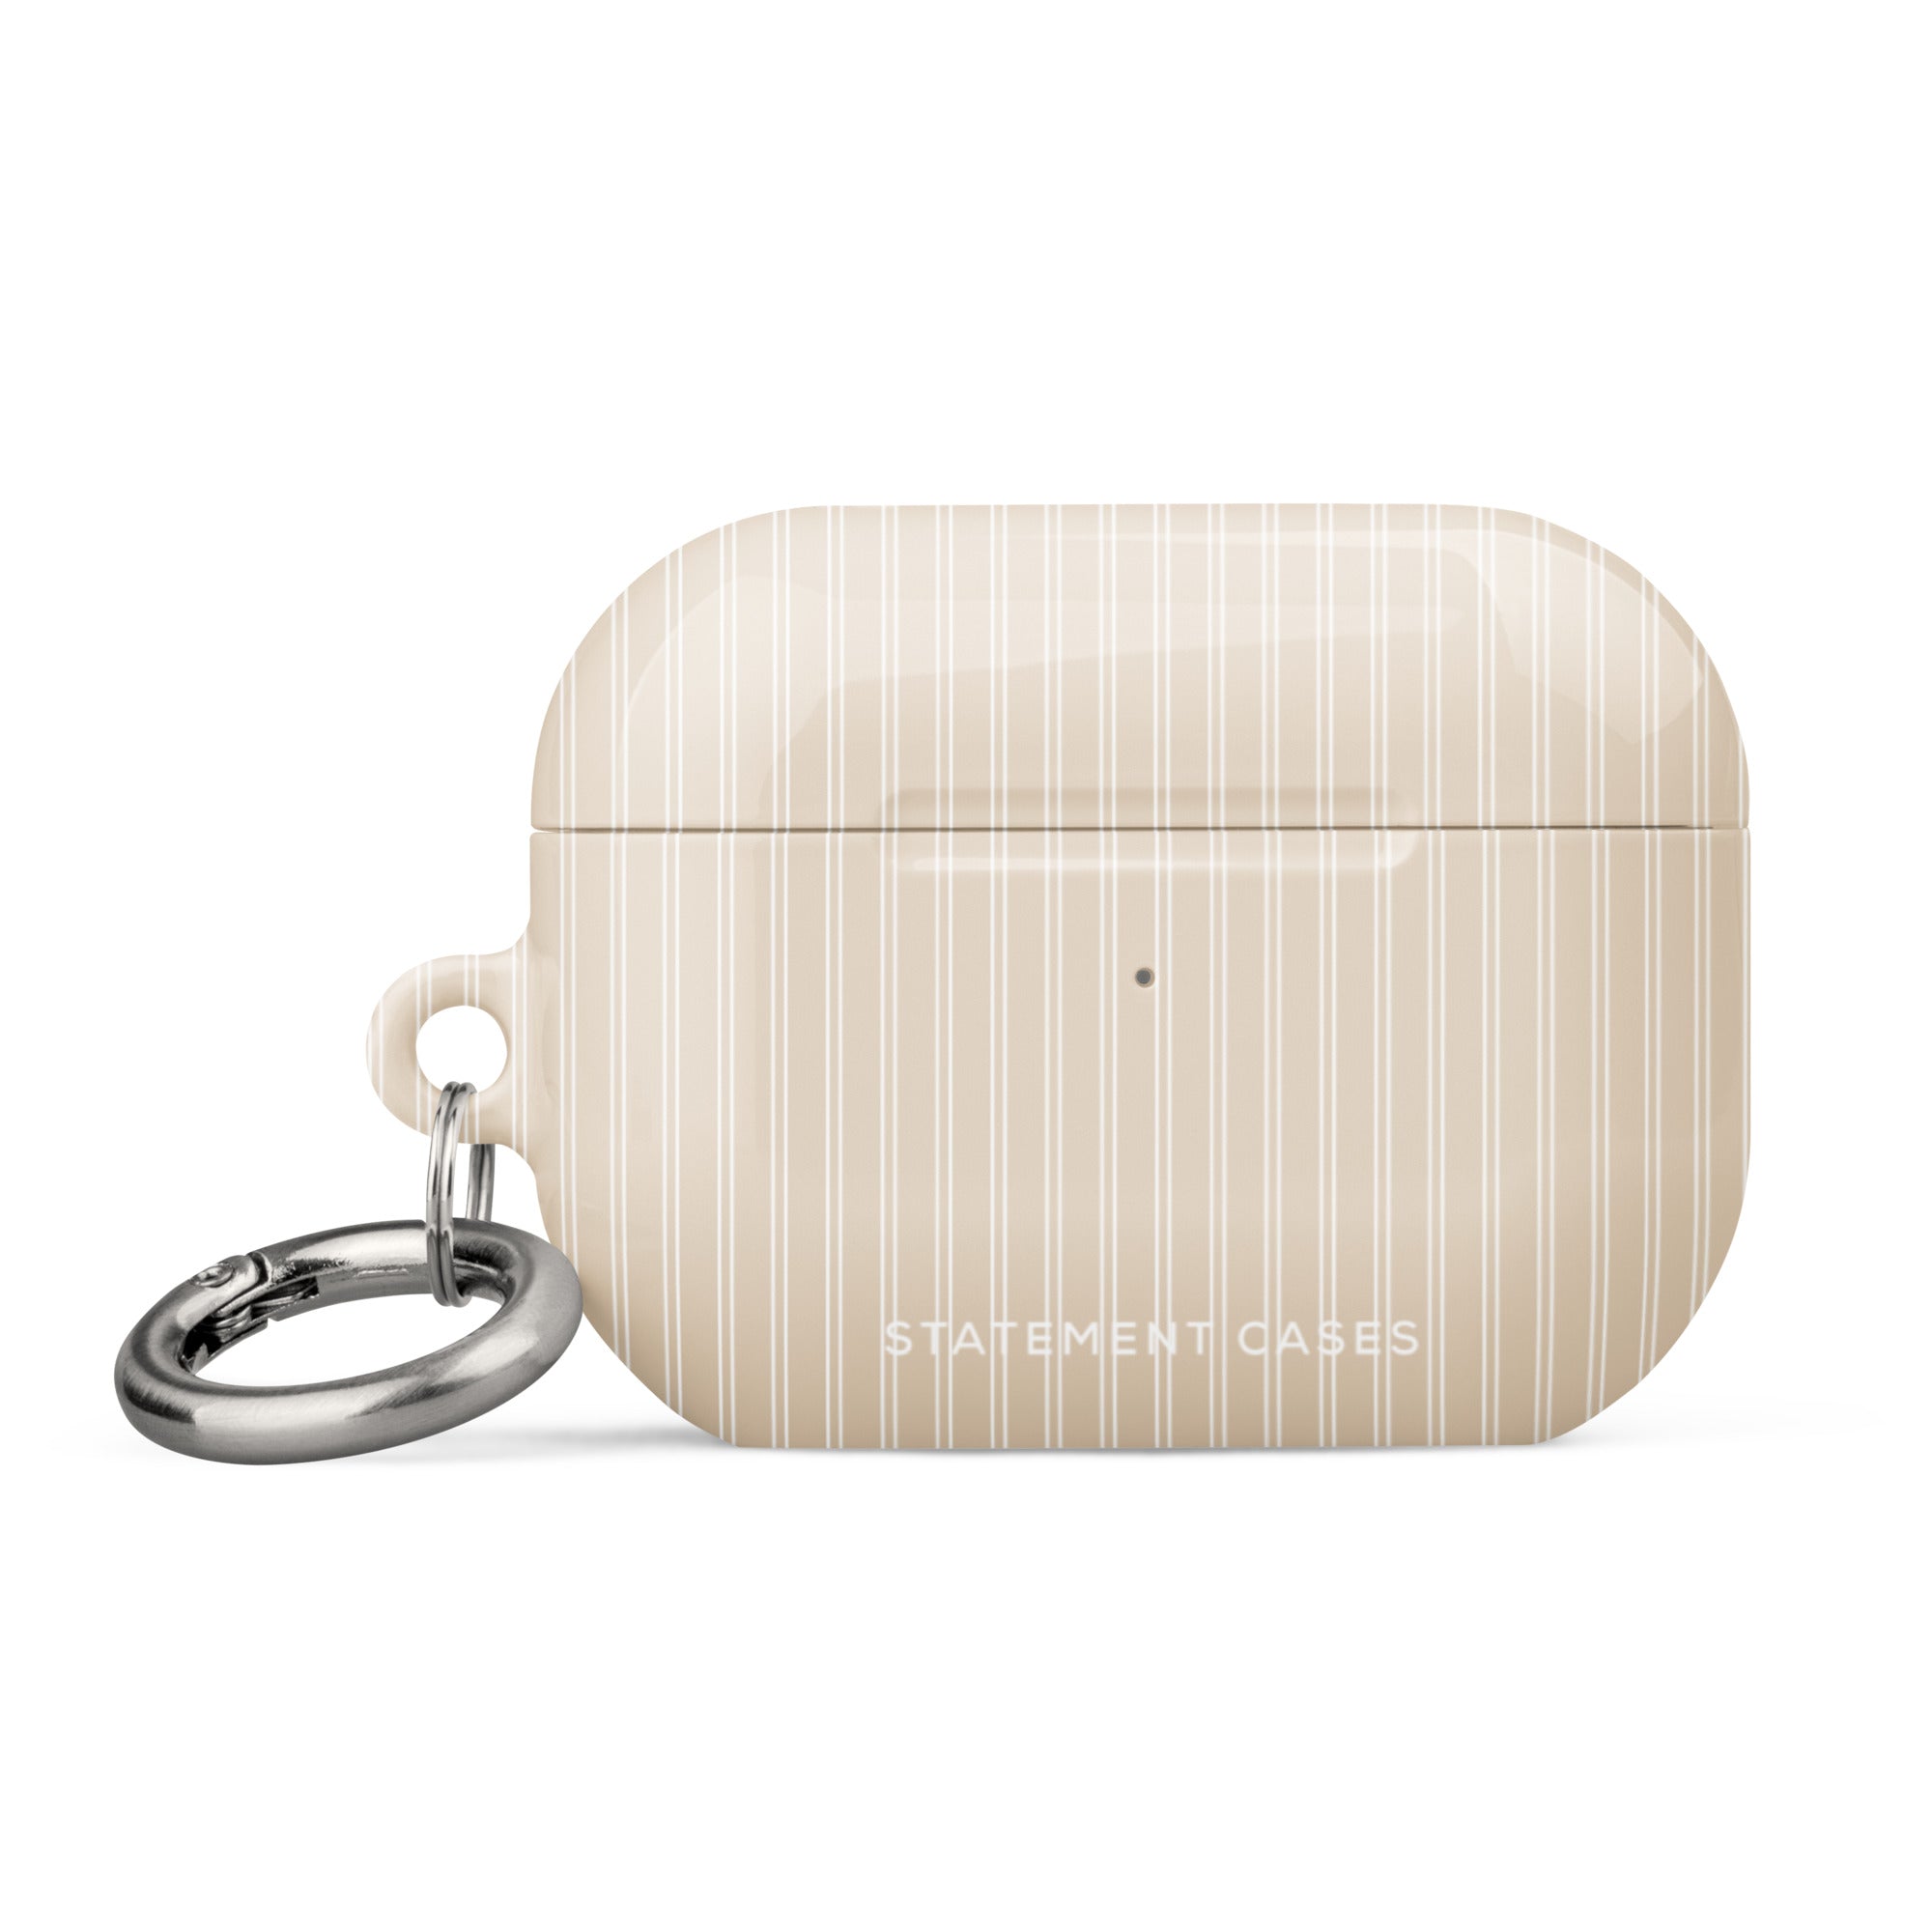 A beige impact-absorbing Noble Pinstripe for AirPods Pro Gen 2 from "Statement Cases" with thin vertical white stripes is shown. The case features a metal carabiner on the left side, making it convenient for attaching to keys or bags.